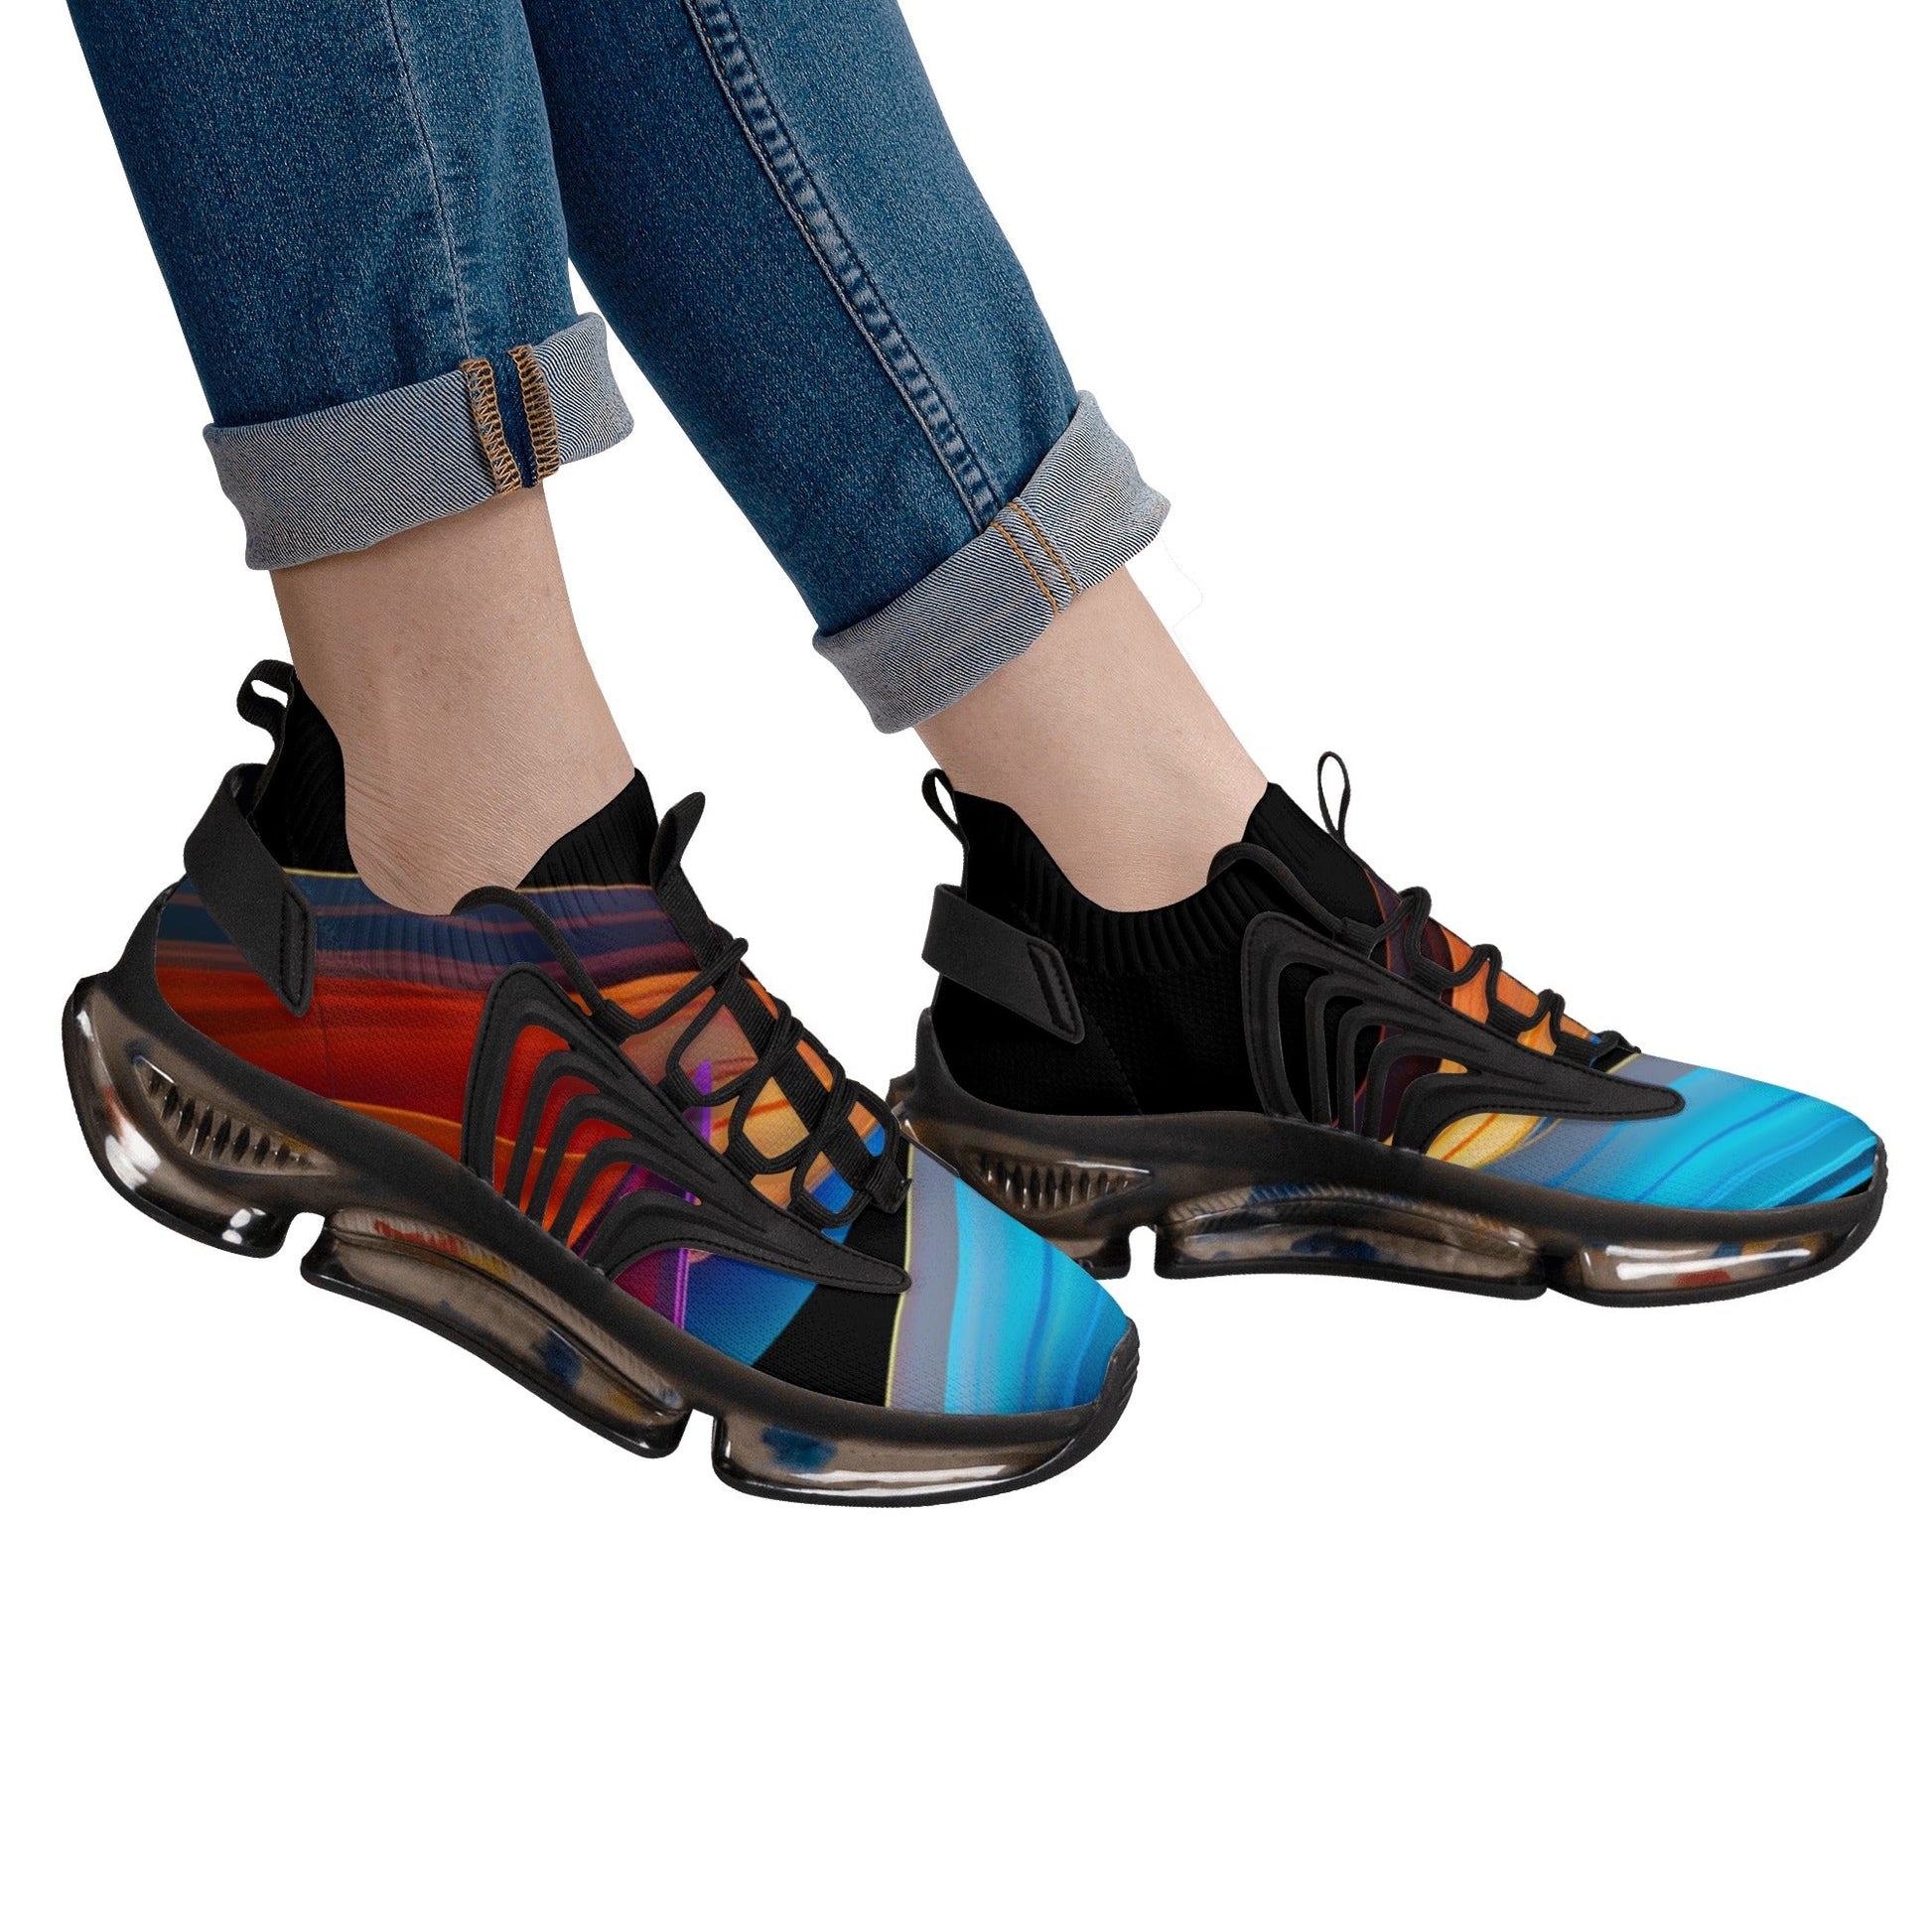 9 Neduz Designs Chroma Air Heel React Sneakers with Max Unit